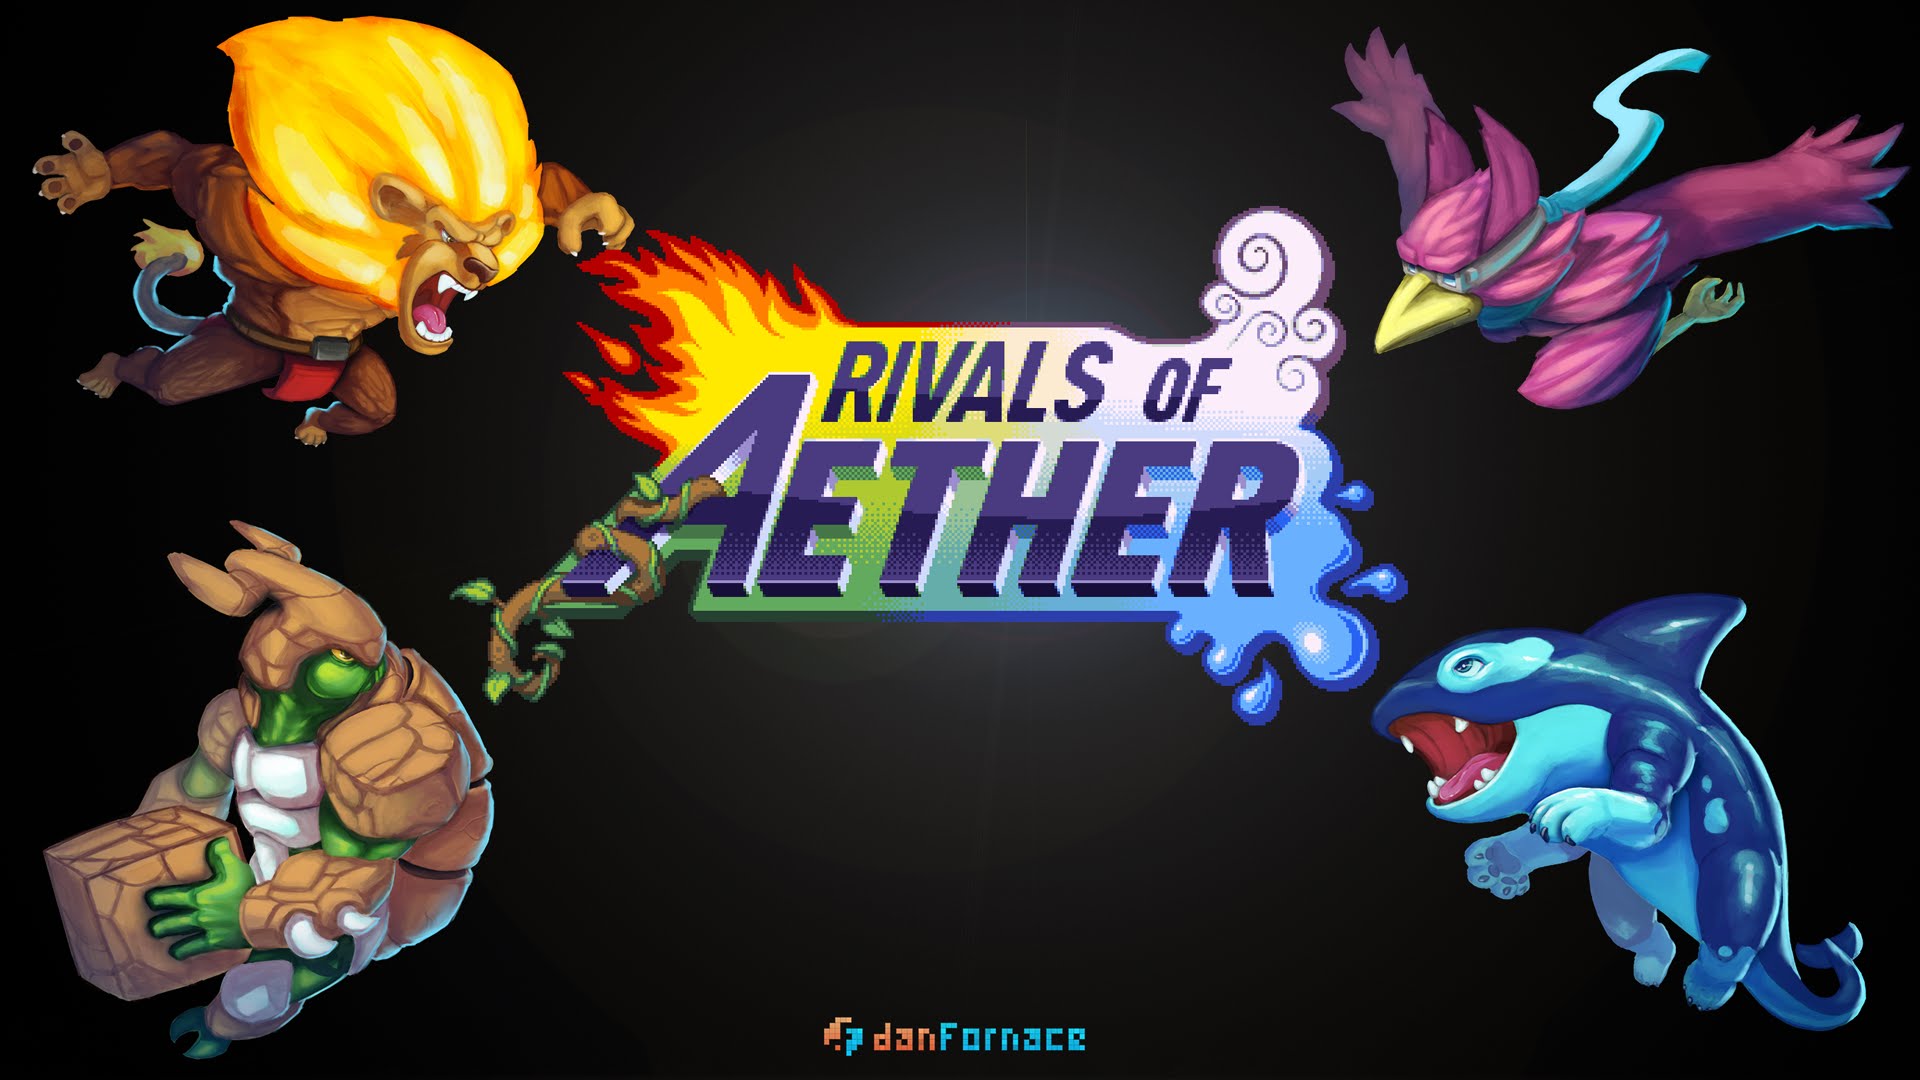 rivals of aether mac download free